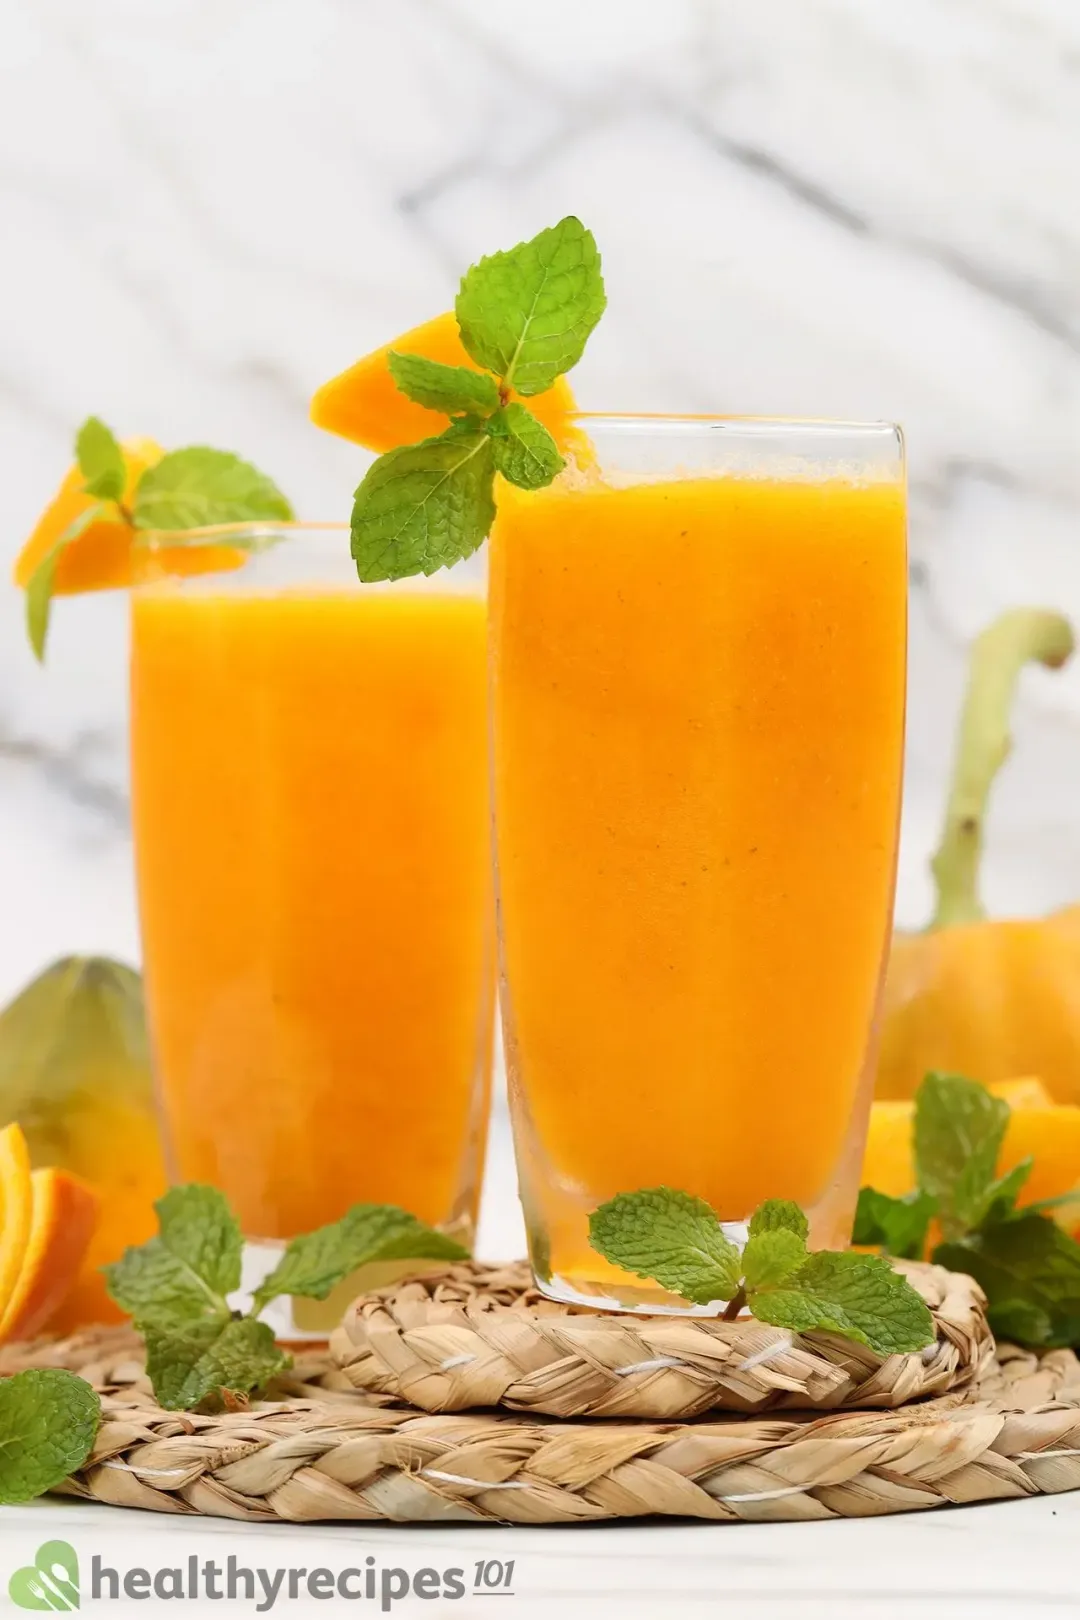 What Happens If You Drink Papaya Juice Daily